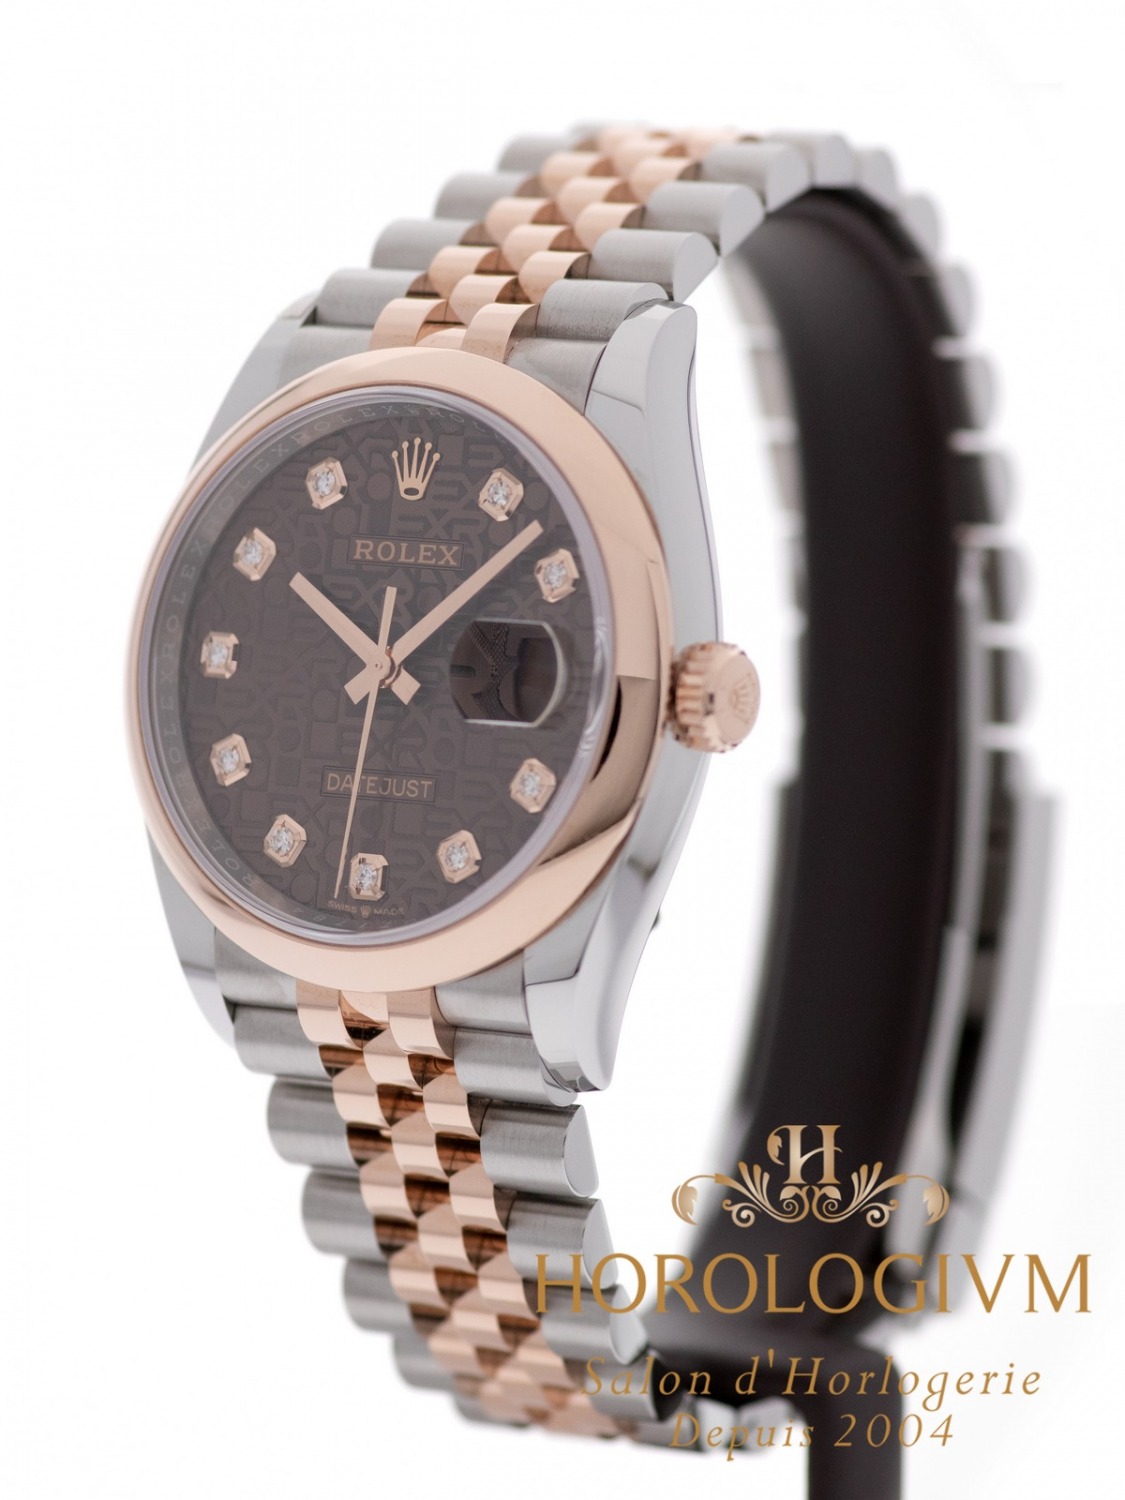 Rolex Datejust Two-Tone 36MM Ref. 126201 watch, two-tone (bi-colored) silver and rose gold